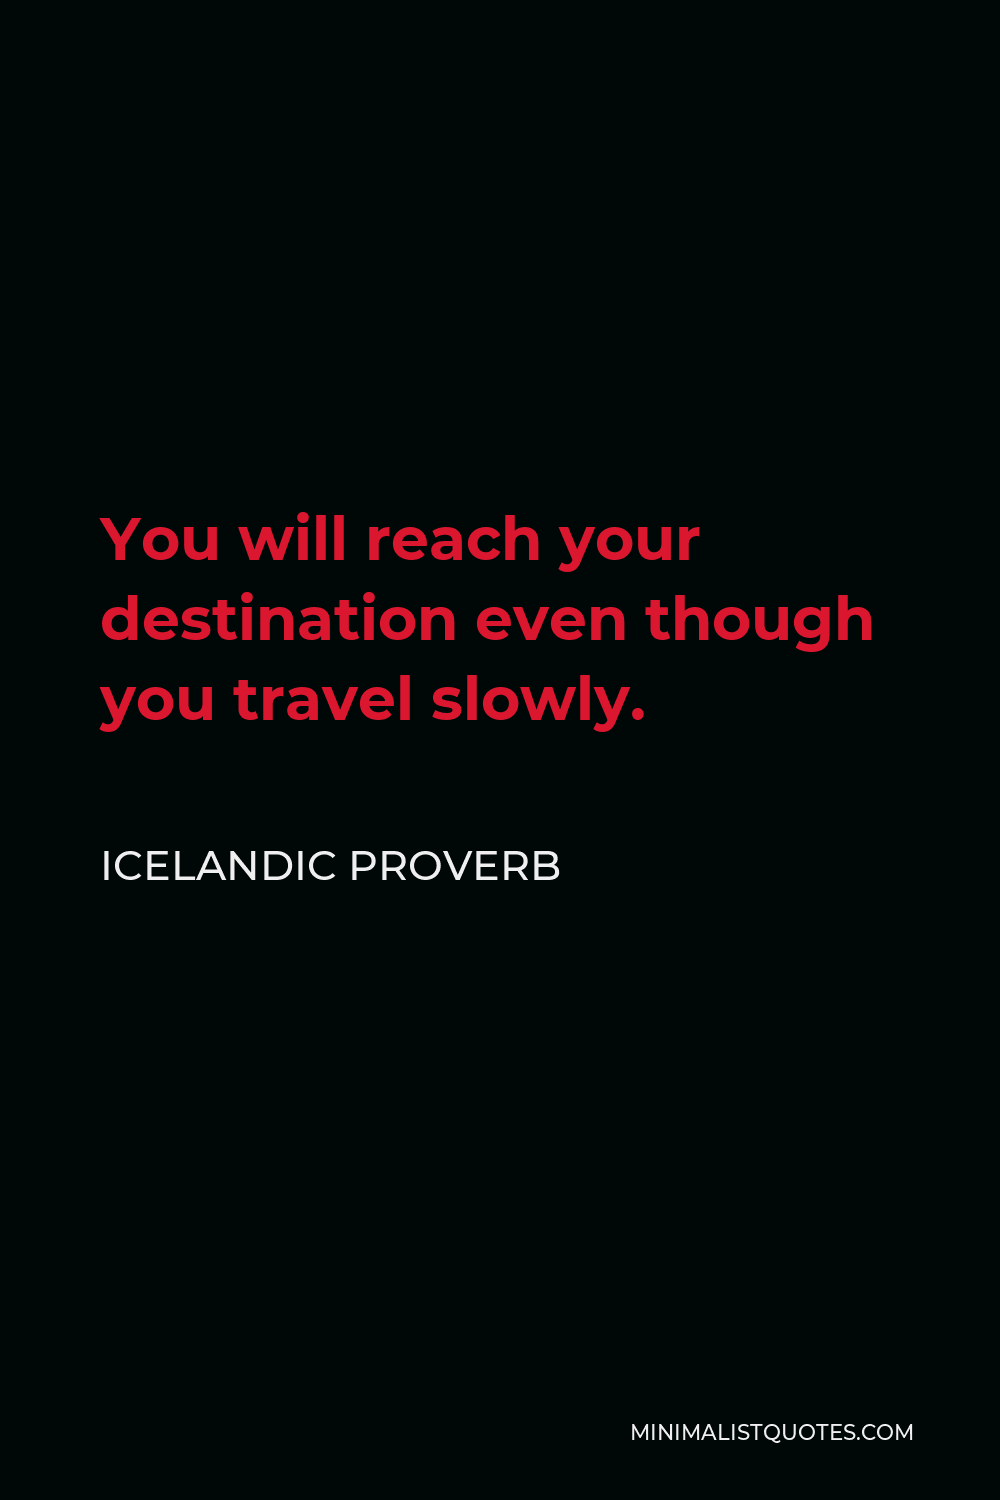 Icelandic Proverb Quote - You will reach your destination even though you travel slowly.